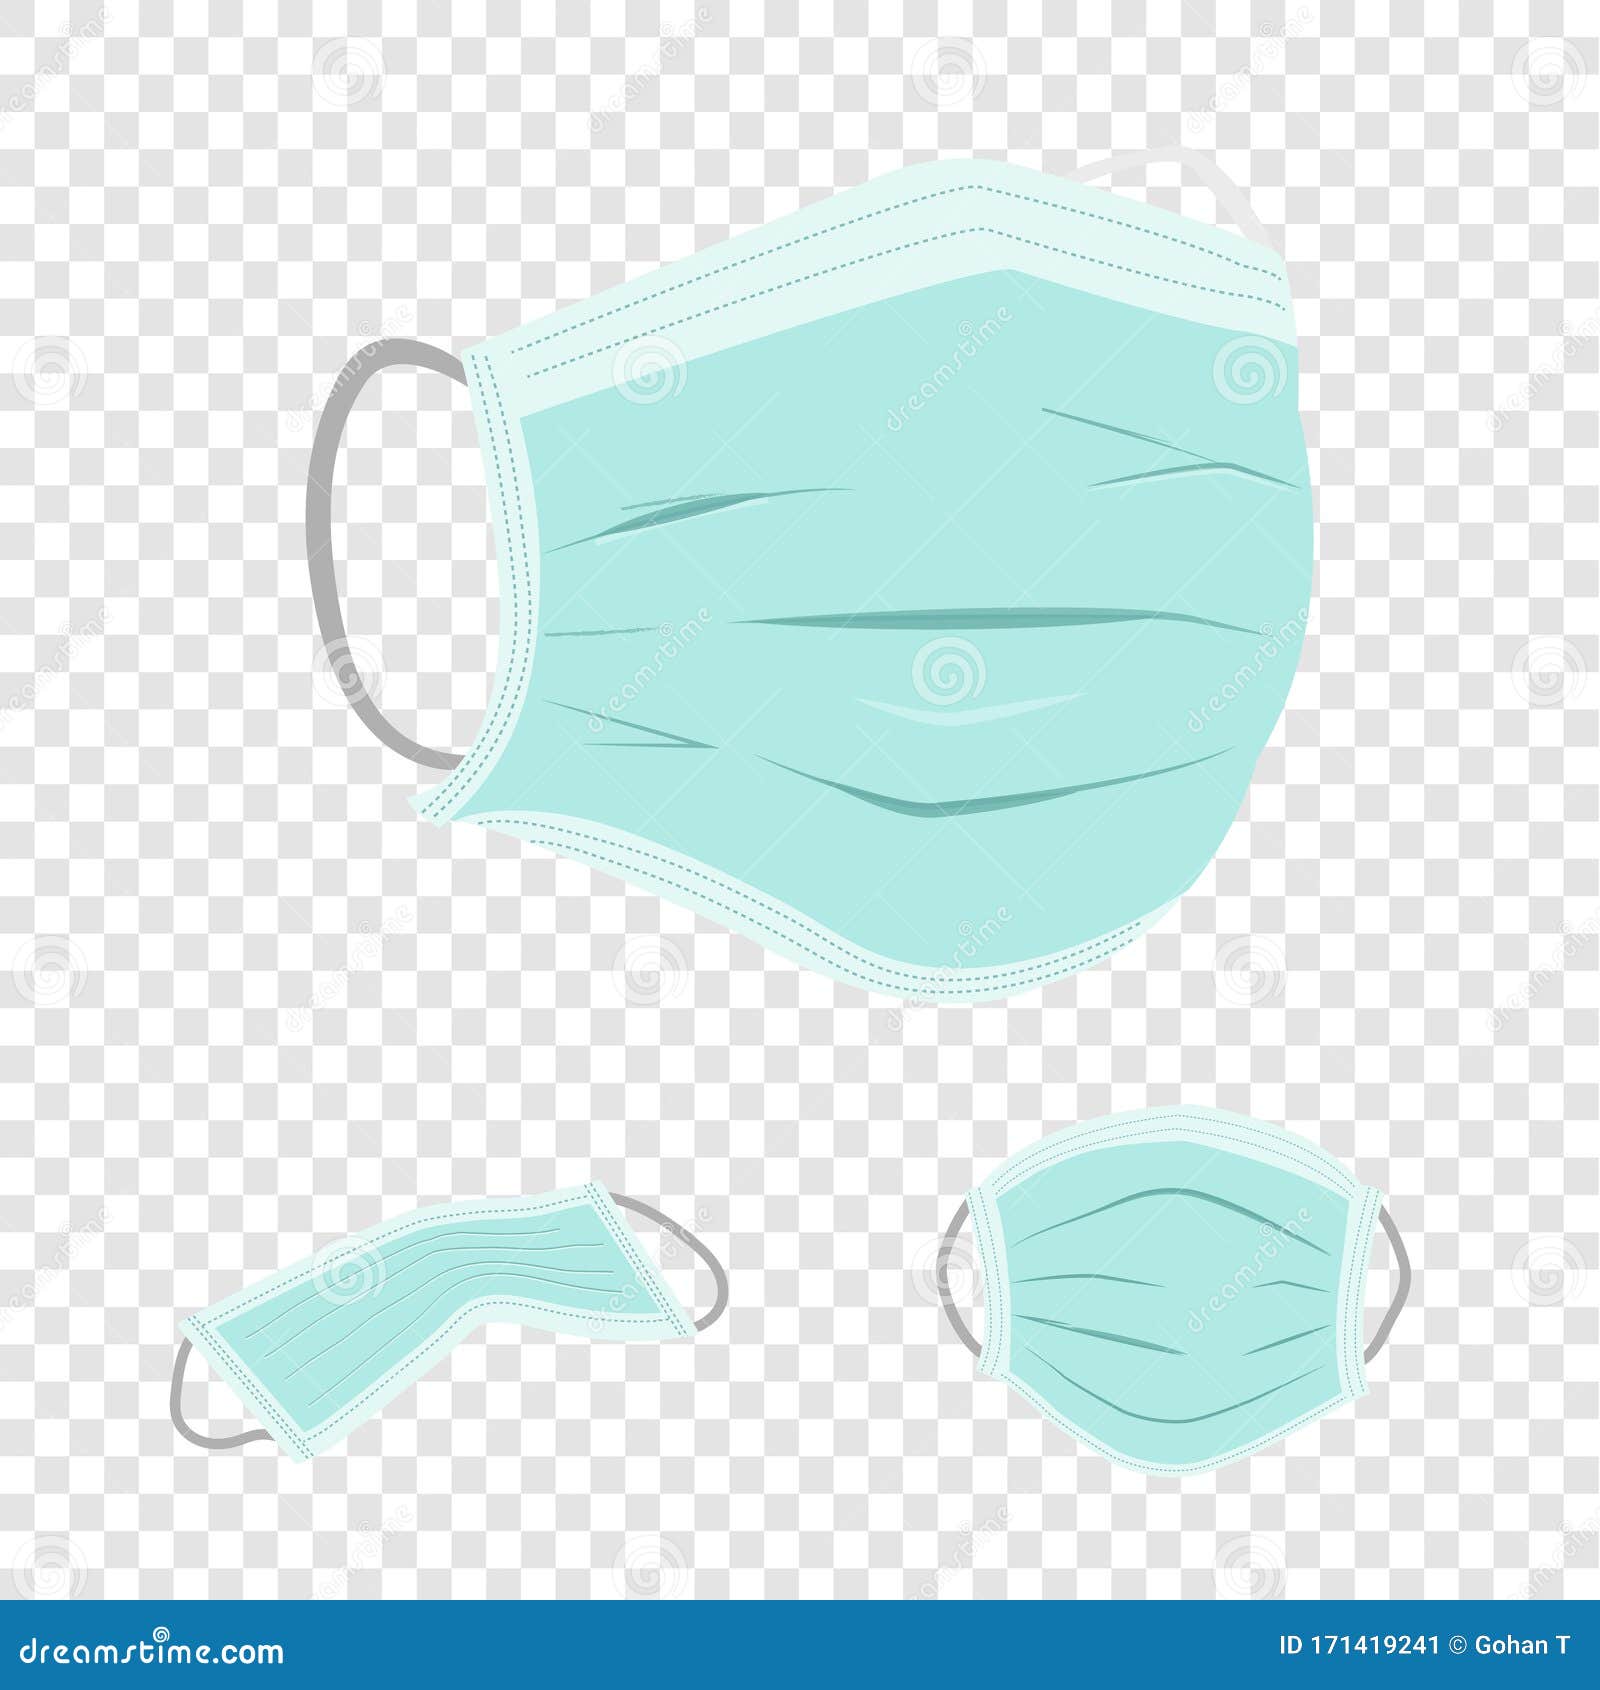 Realistic Hygienic Mask Vectors For Particulate Respirator And Coronavirus Filter On Transparency Background Stock Illustration Illustration Of Exhale Hygienic 171419241